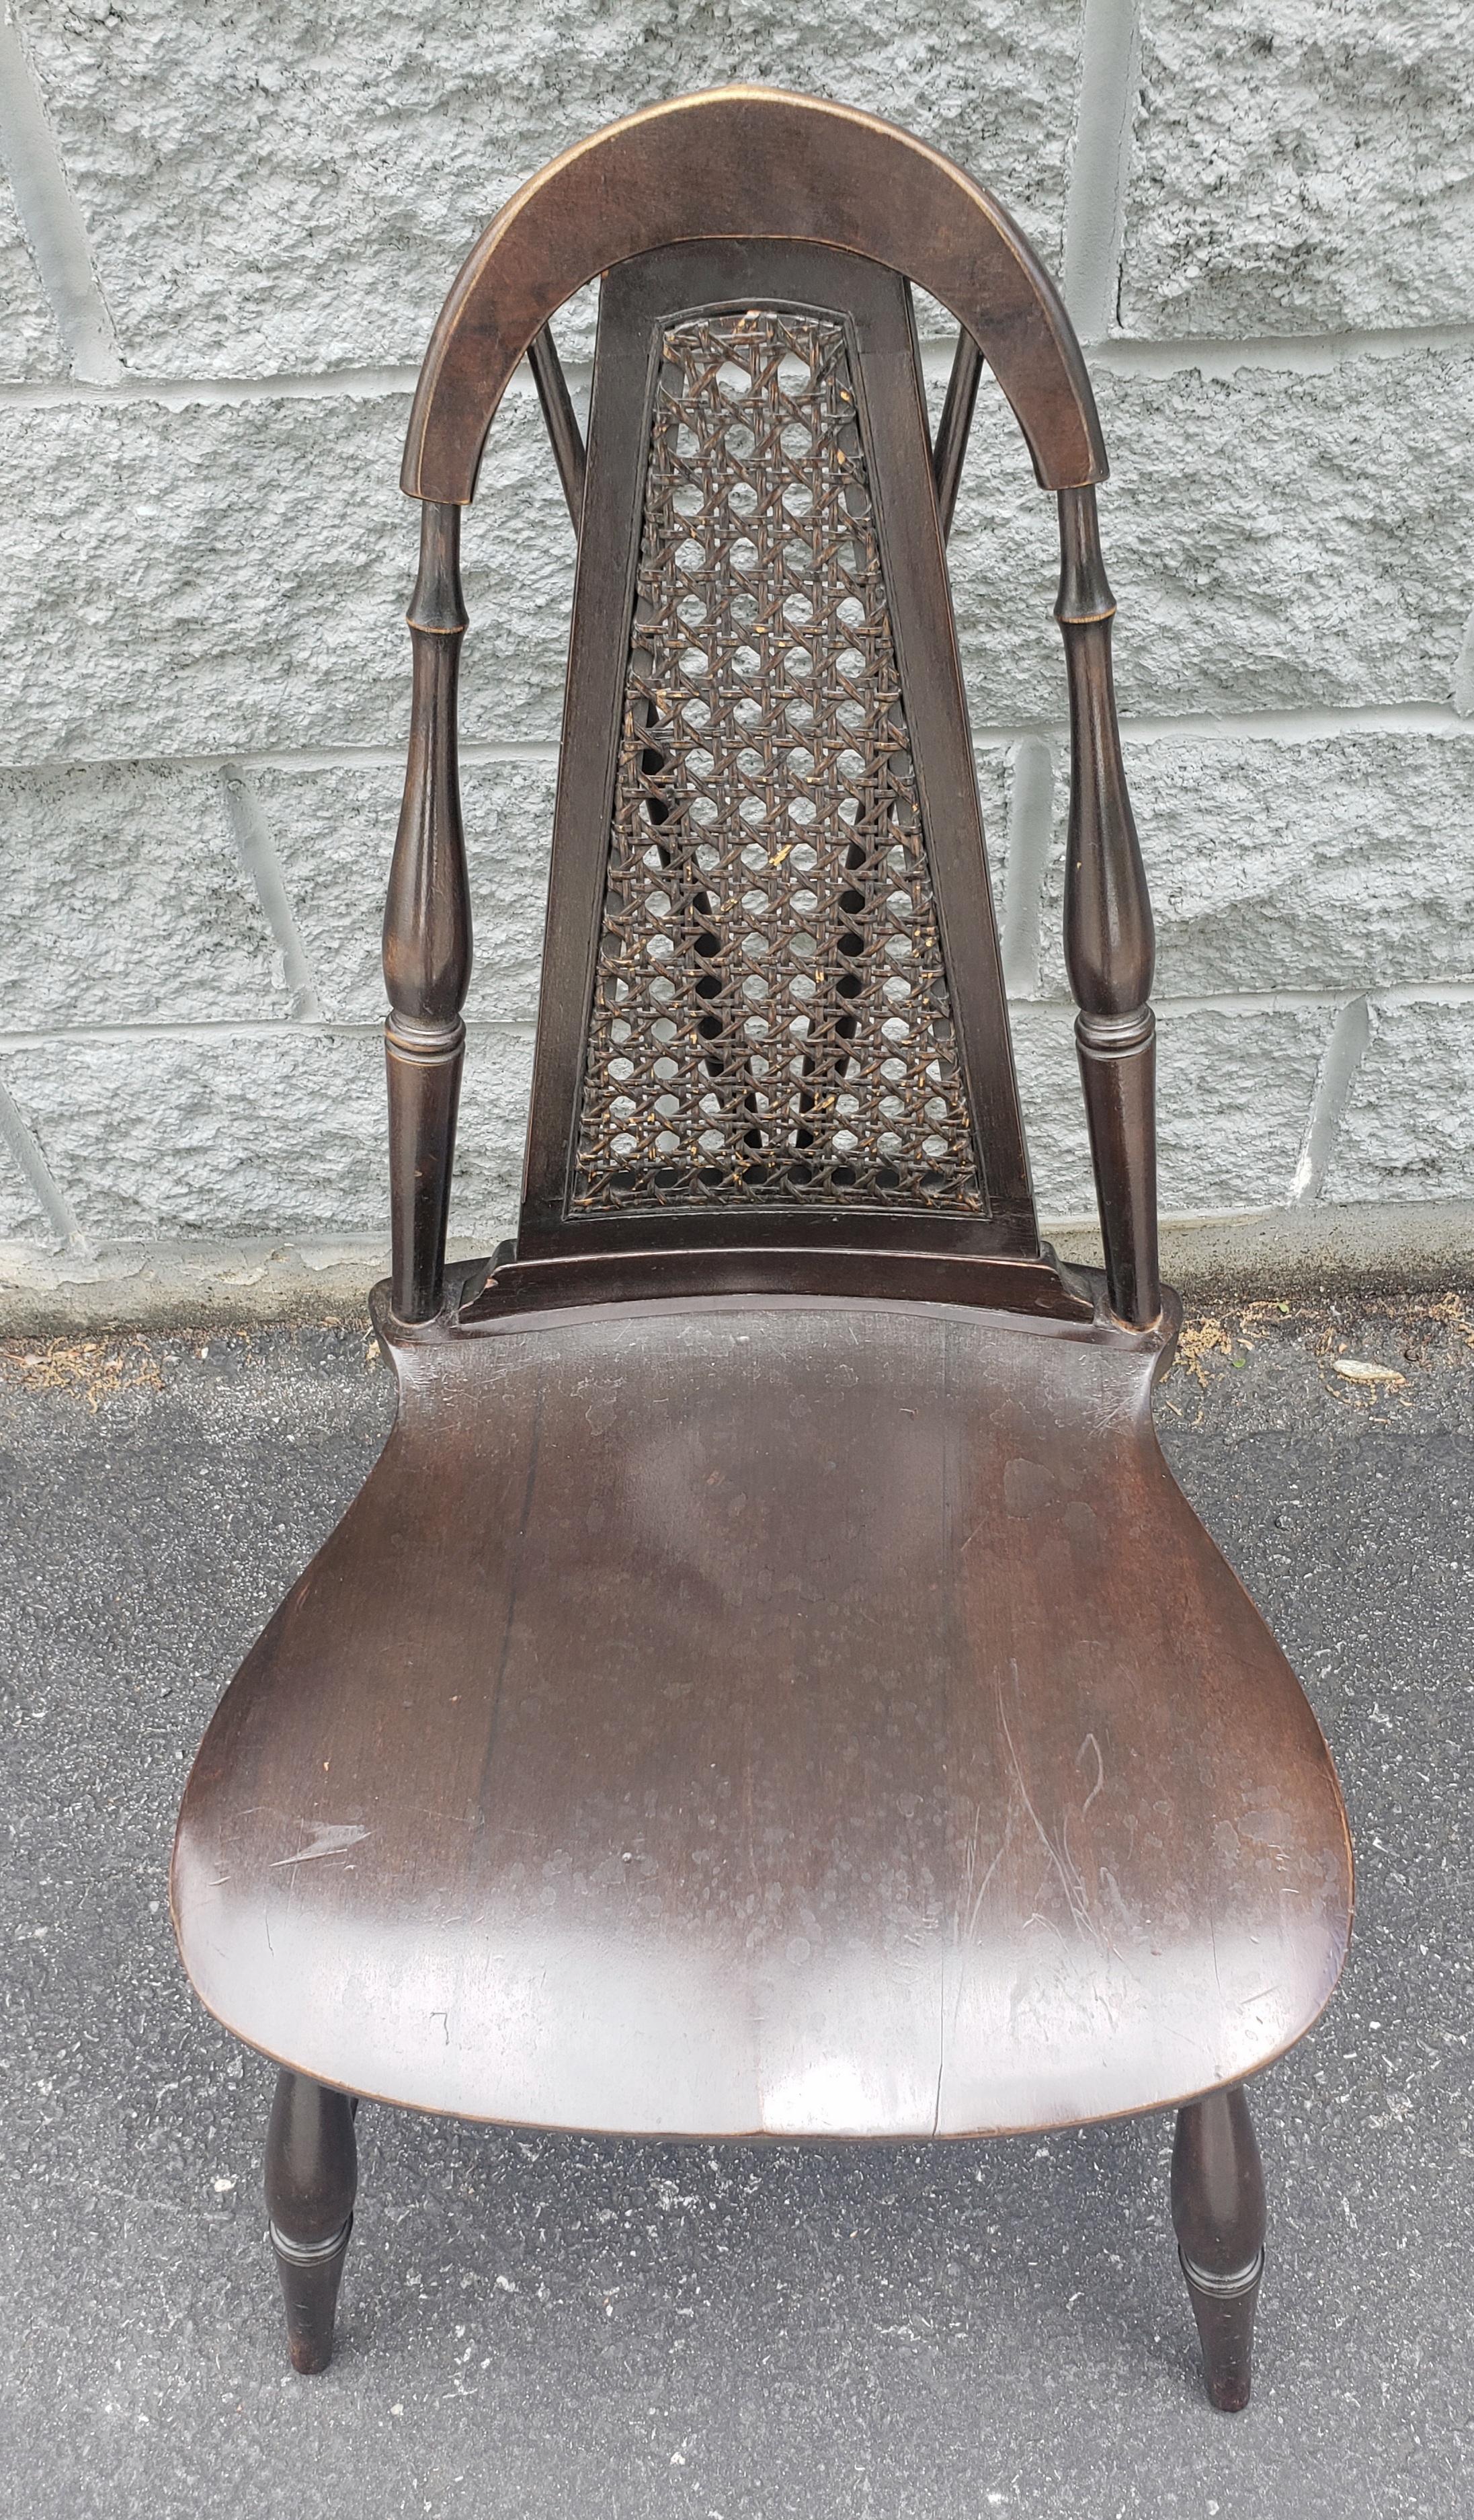 Rare 1940s Walnut and Cane Brace Back Windsor Chair in good vintage condition.
Measures 18